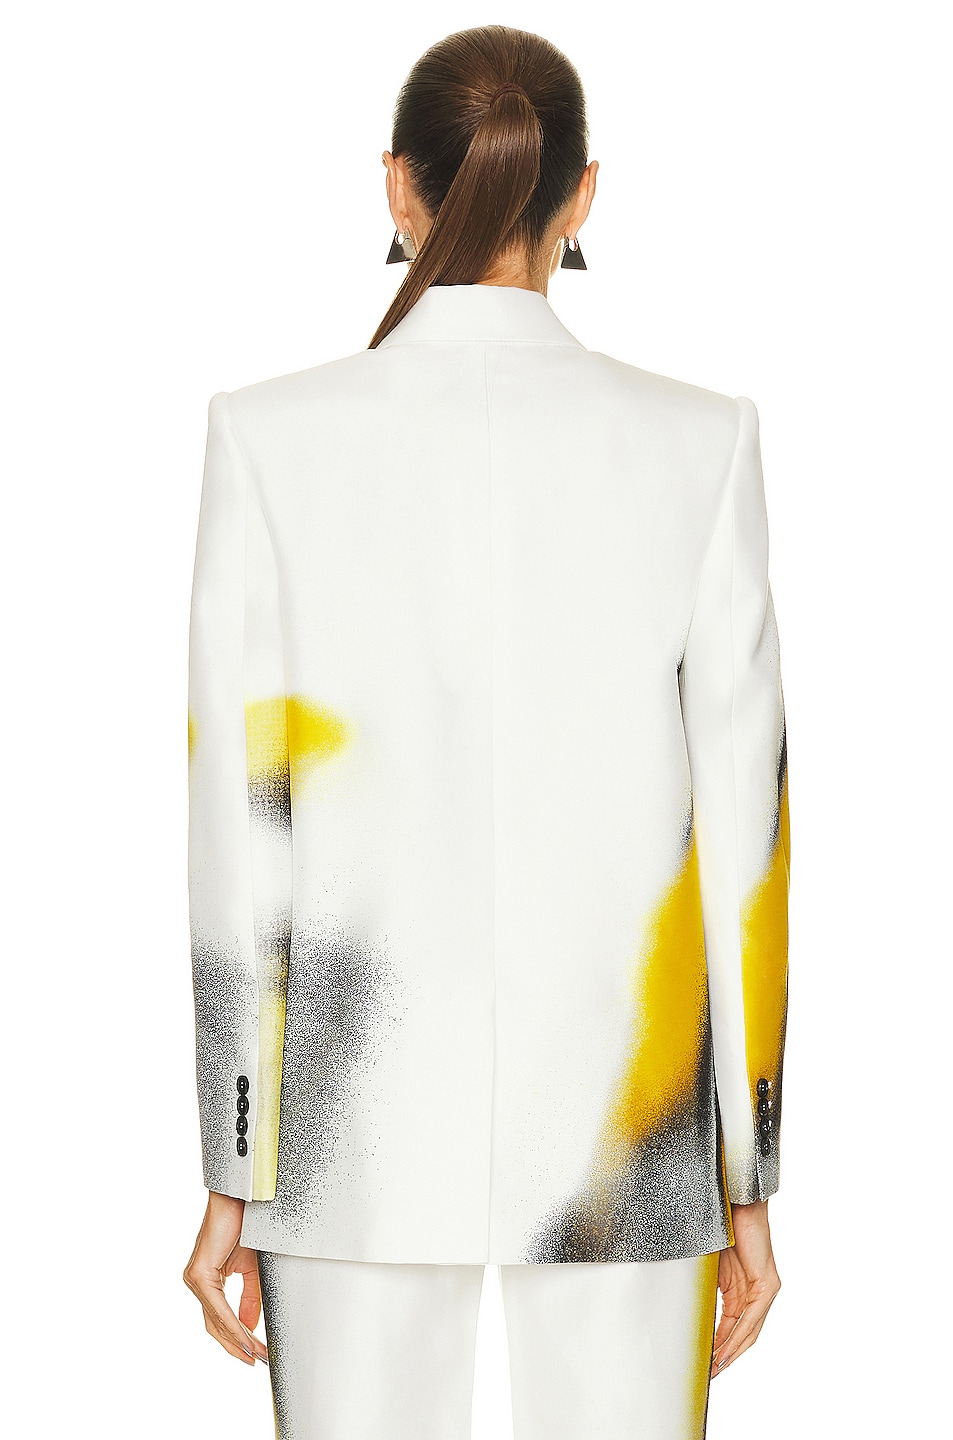 Alexander McQueen Double Breasted Boxy Jacket in White & Acid Yellow | FWRD